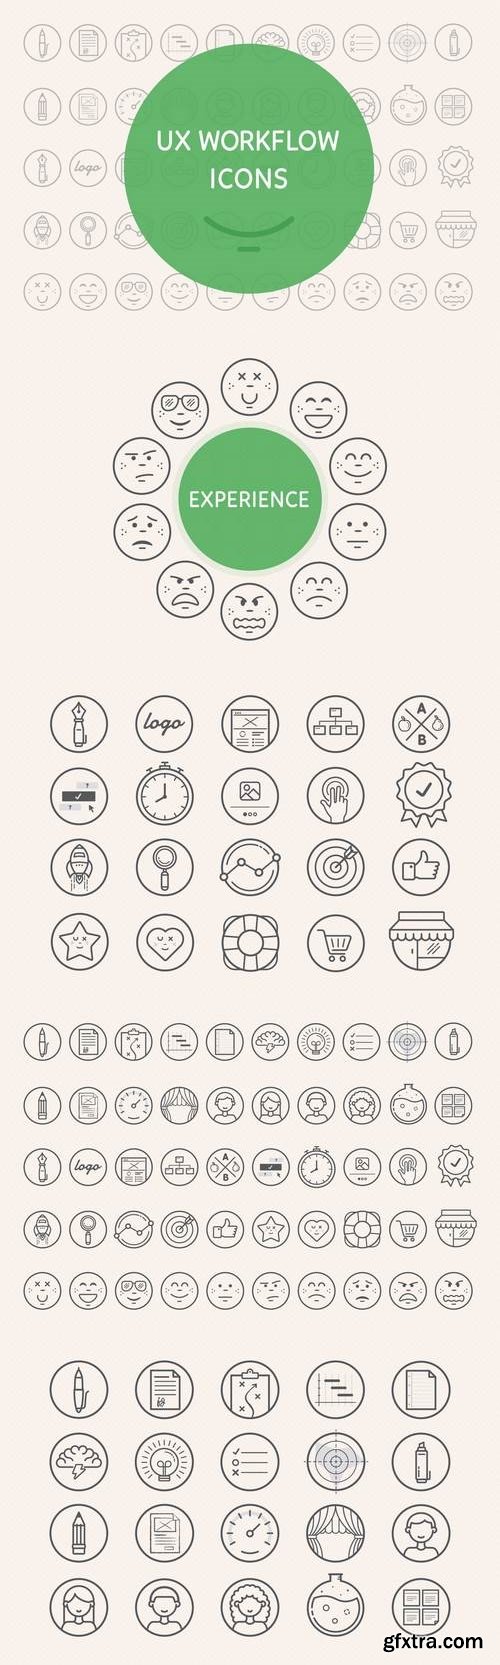 UX Workflow - Icons